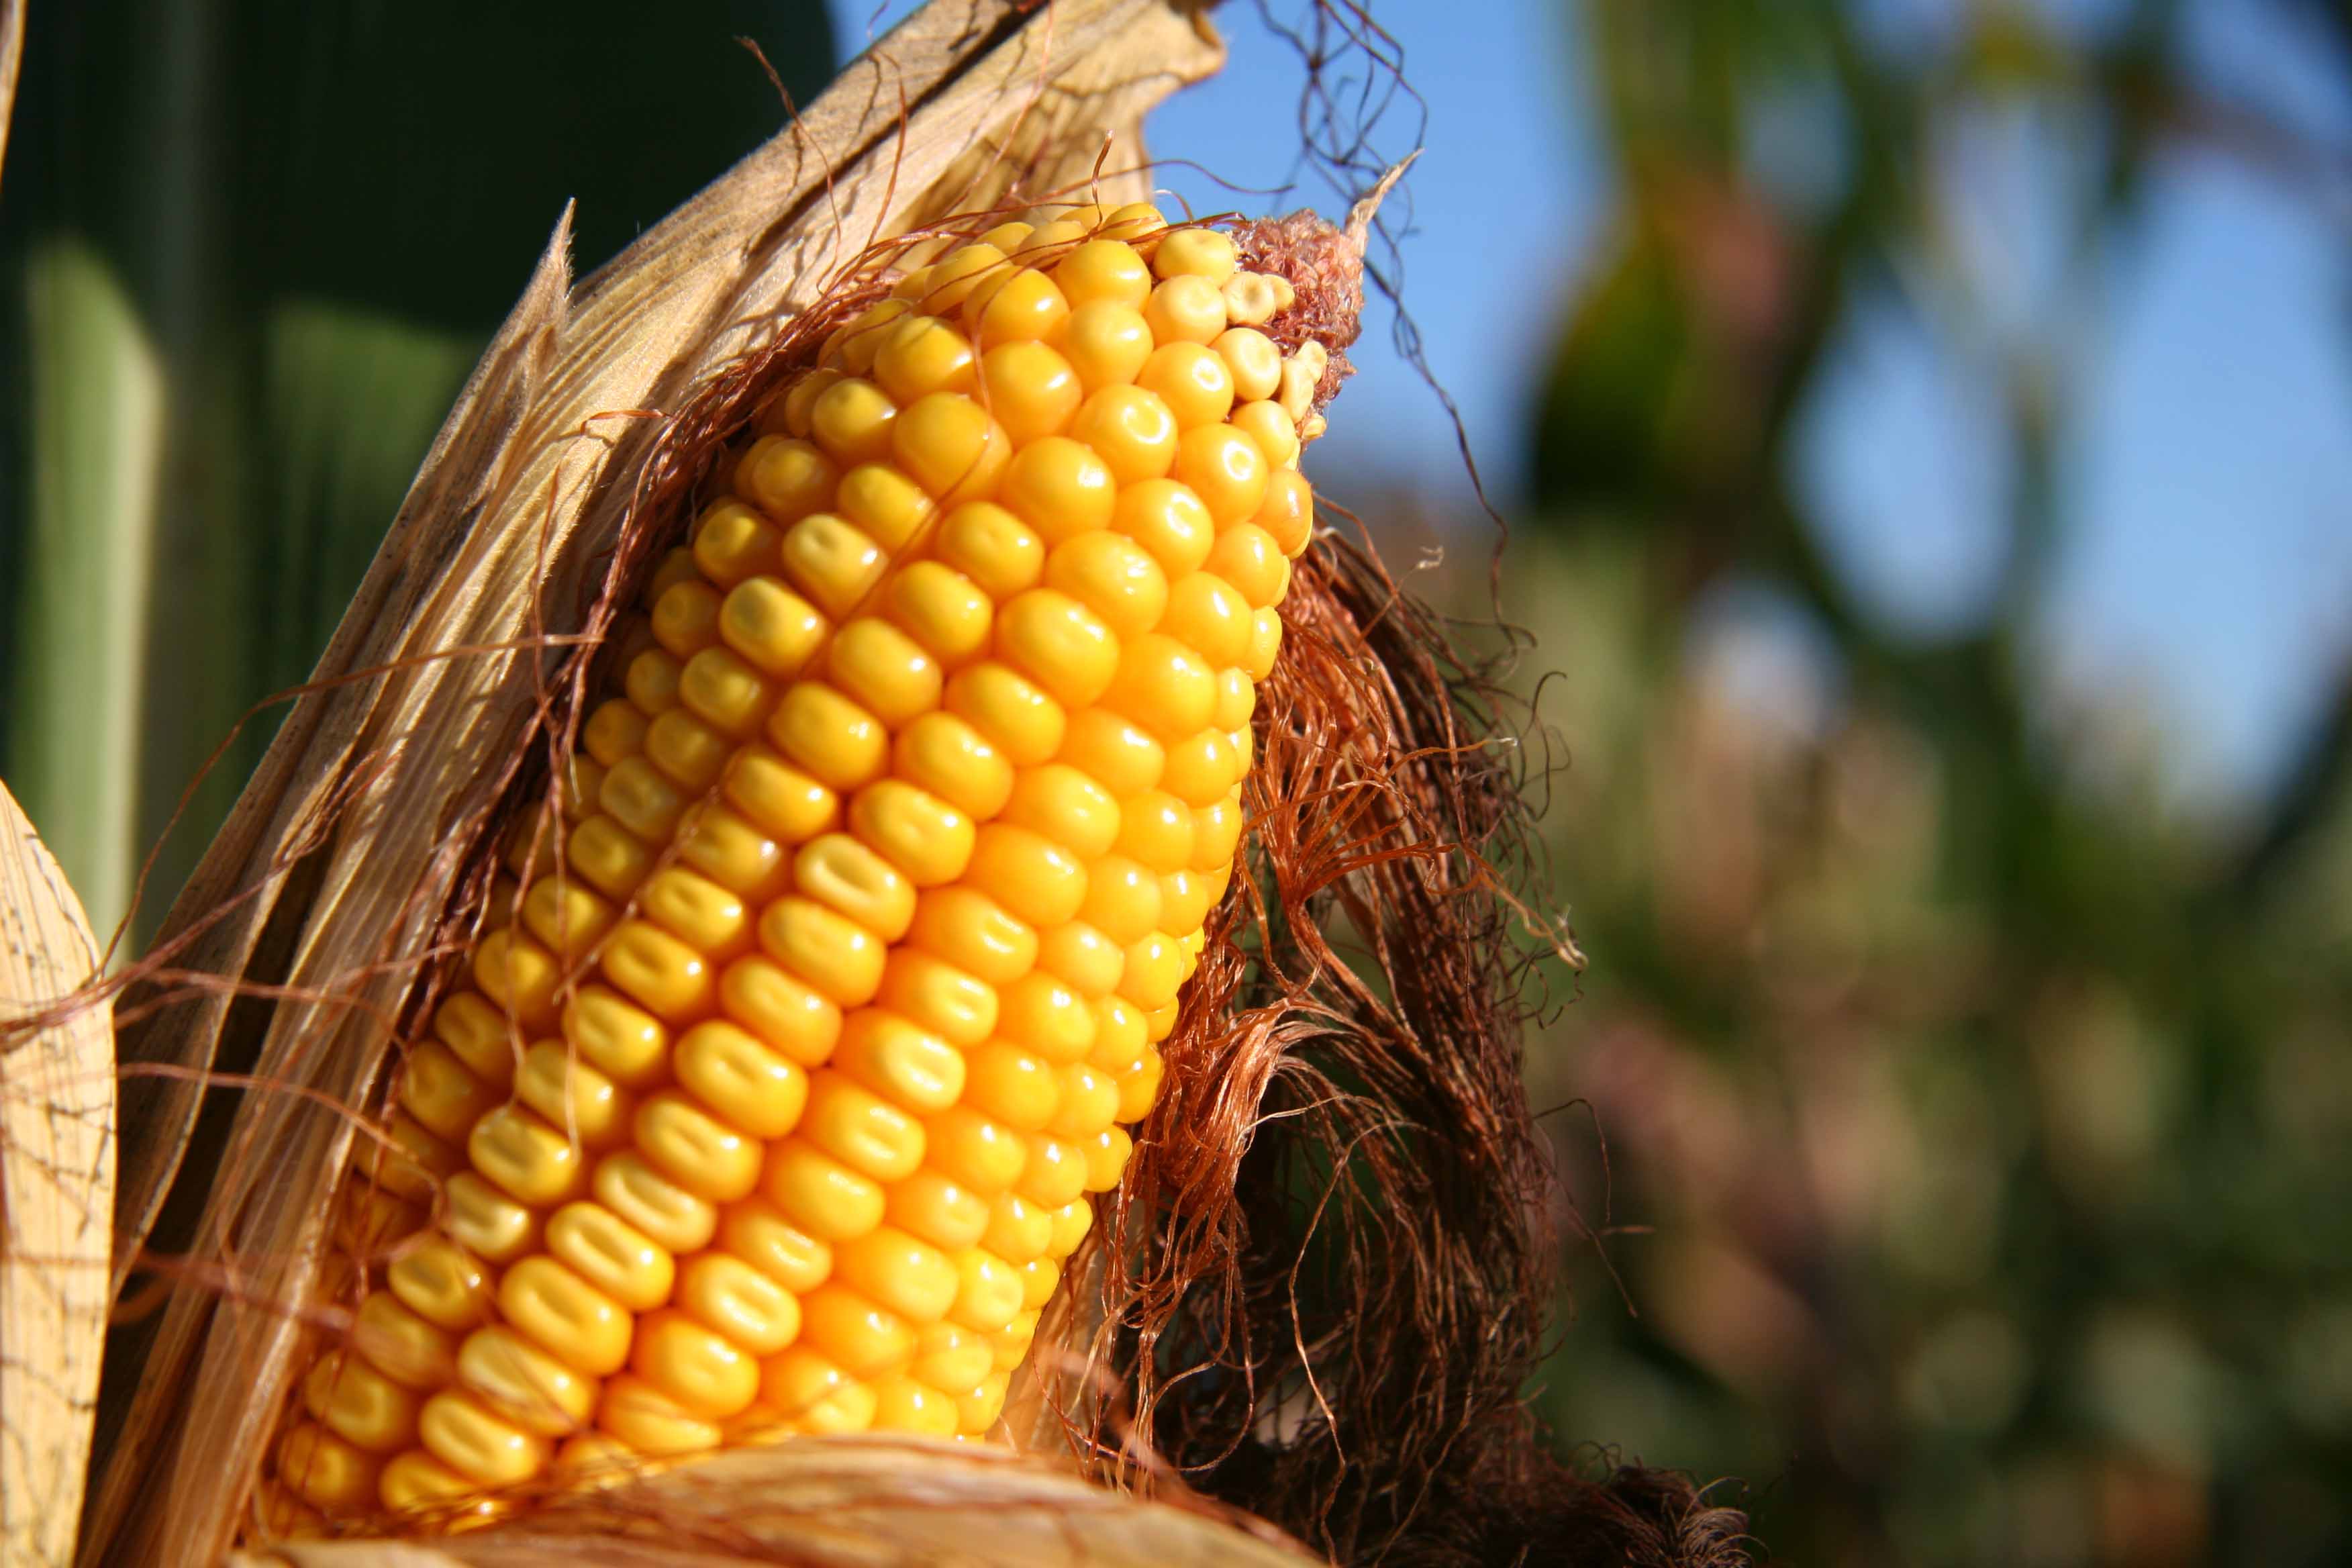 Mexico to Phase-Out GMO Corn and Glyphosate.